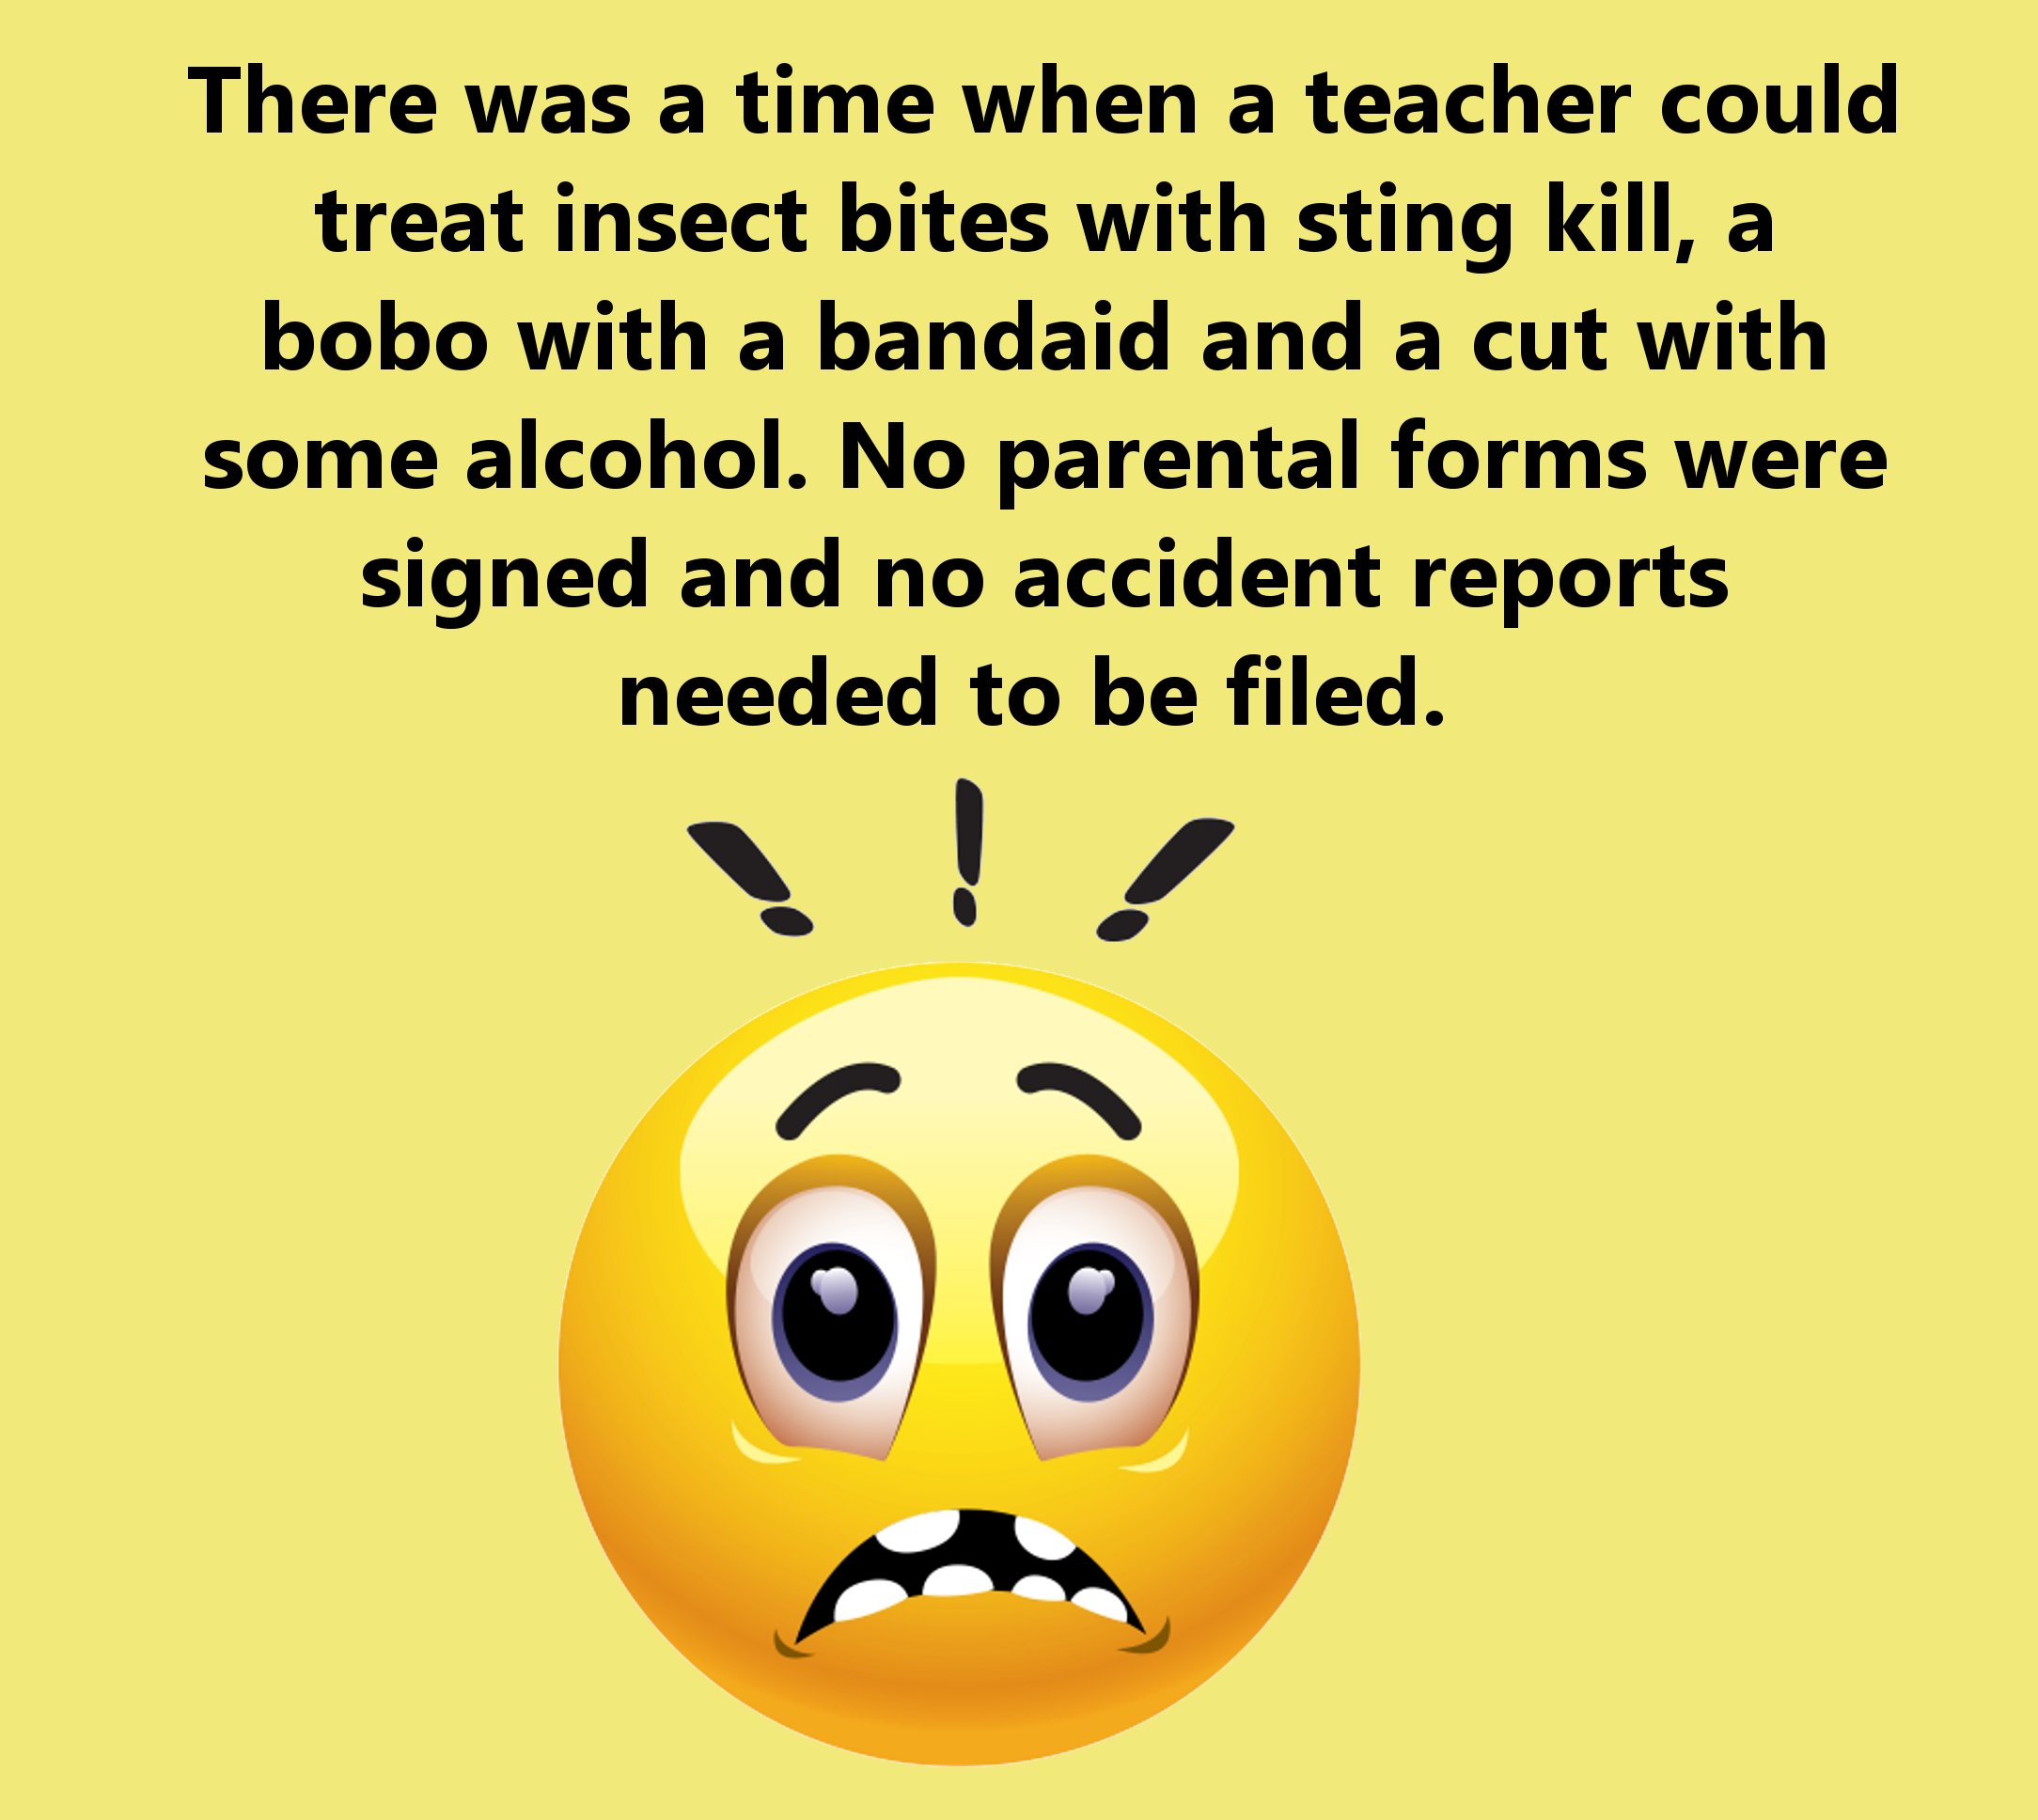 smiley - There was a time when a teacher could treat insect bites with sting kill, a bobo with a bandaid and a cut with some alcohol. No parental forms were signed and no accident reports needed to be filed.